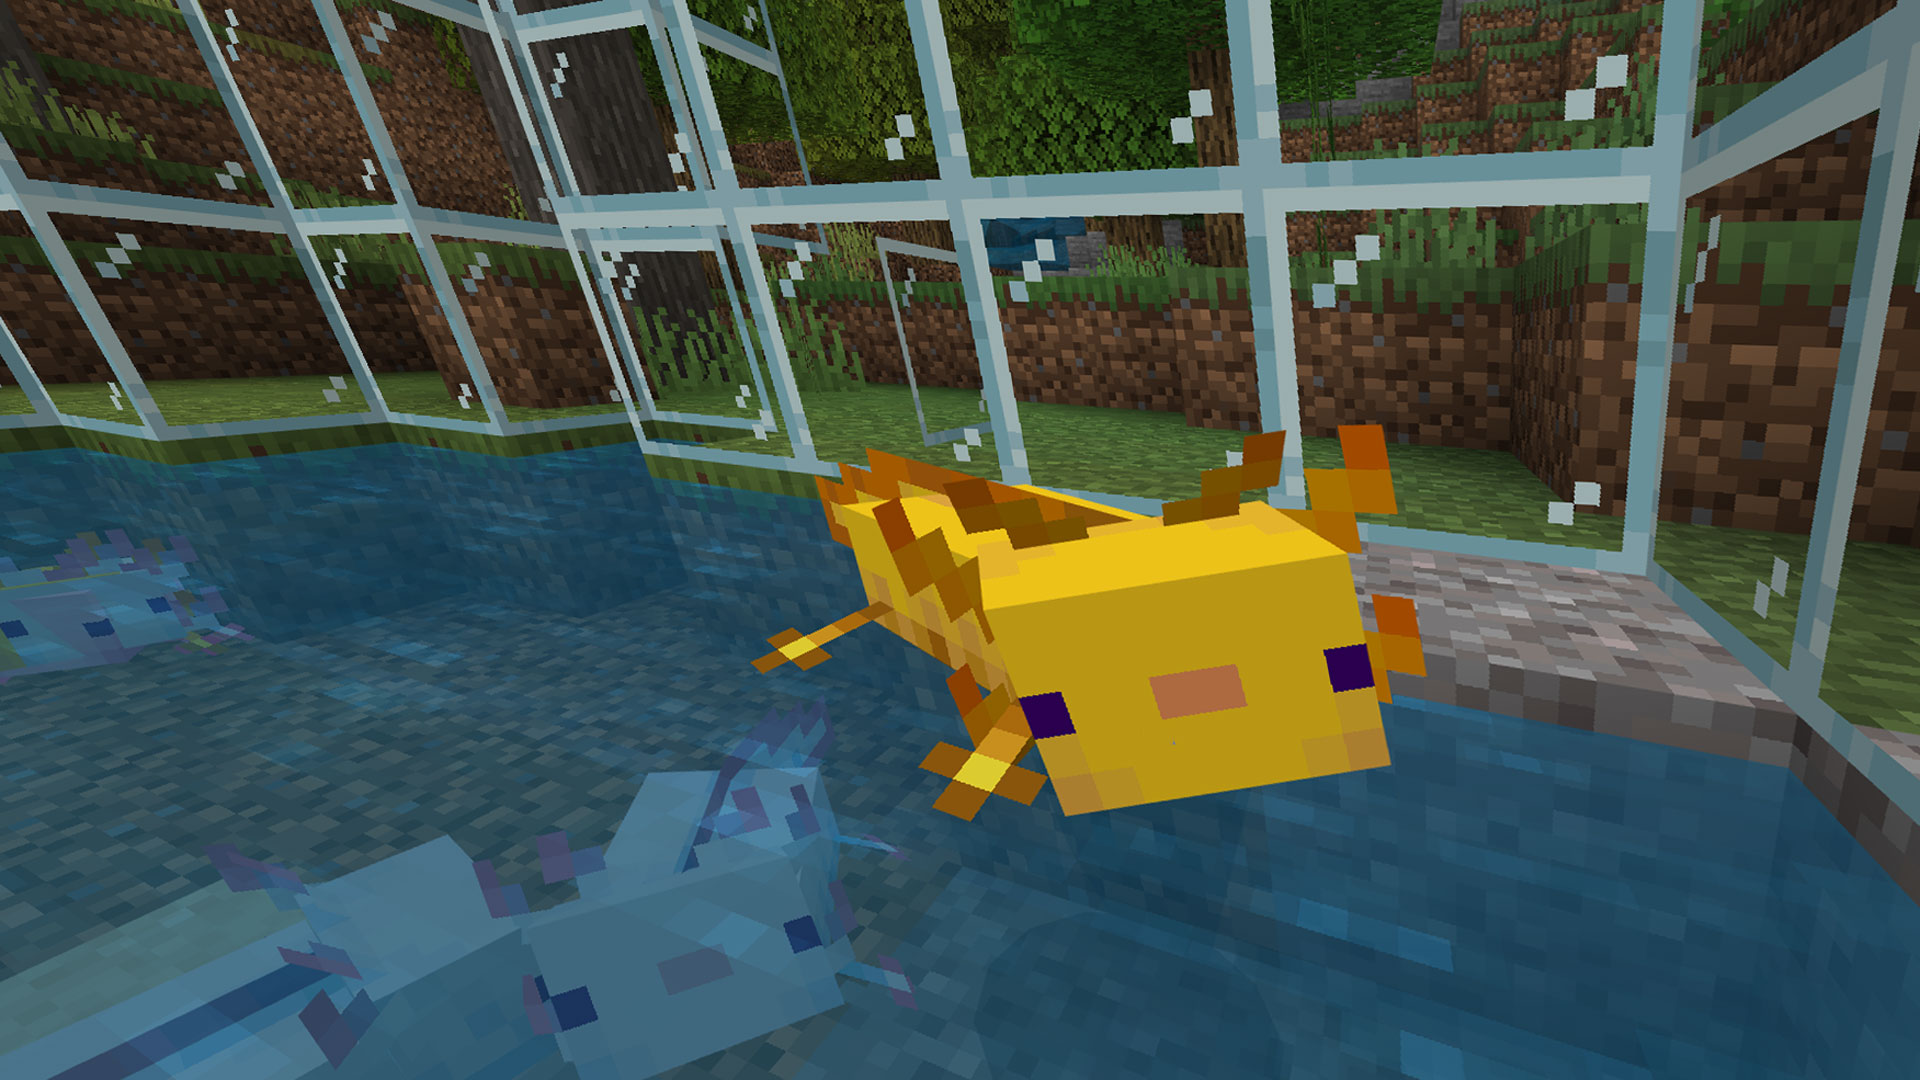 Minecraft axolotl guide how to find, breed, and tame